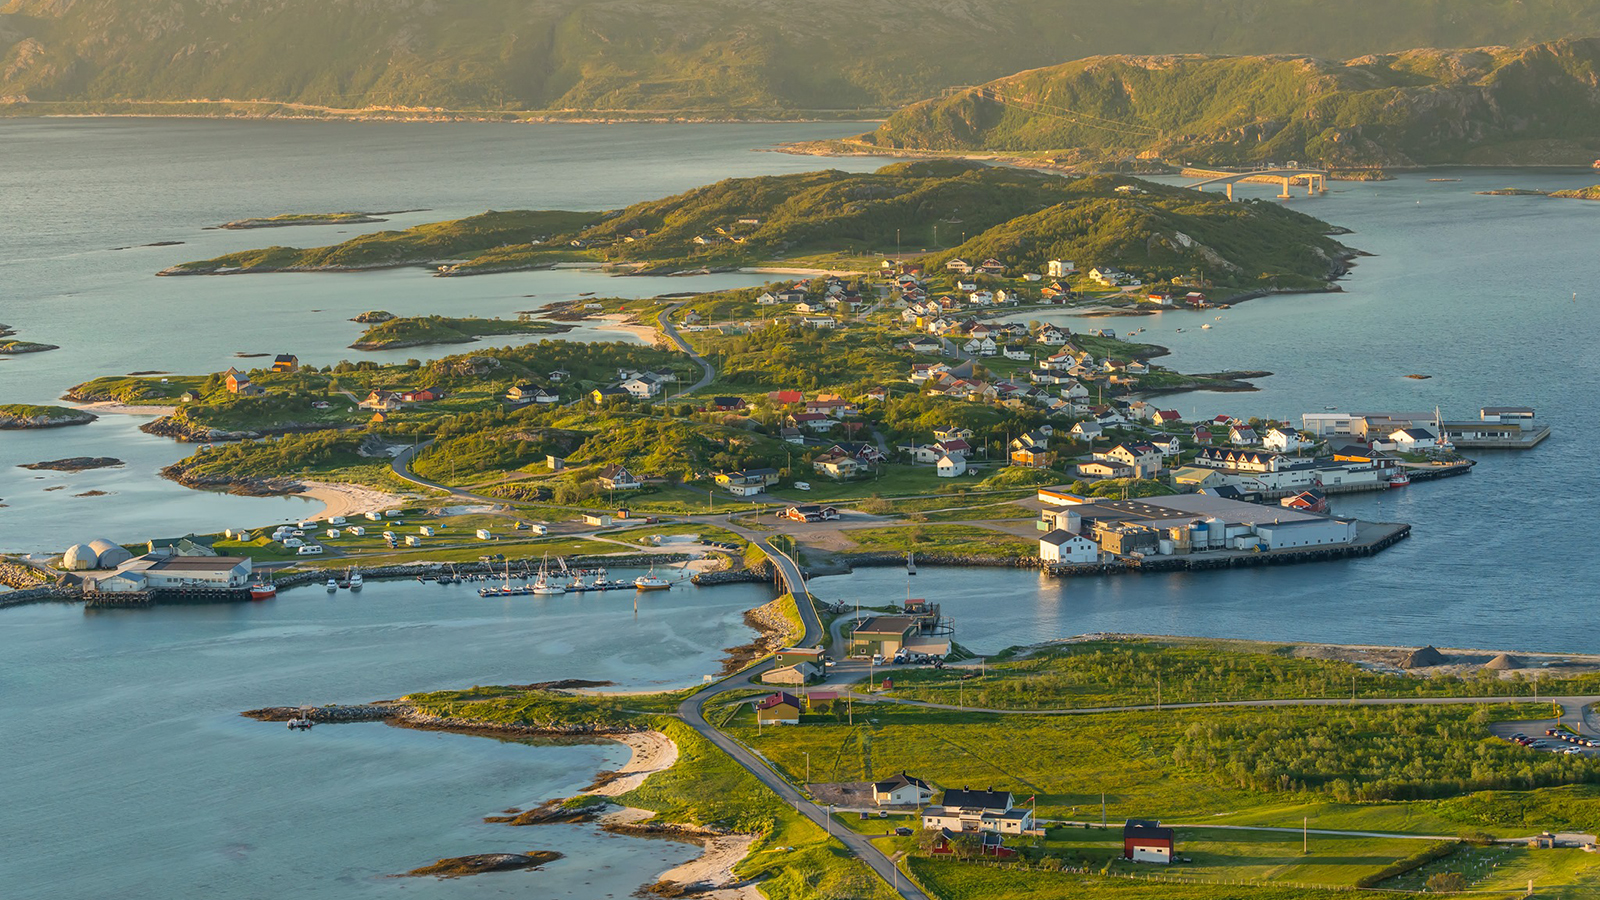 Can You *Actually* Score at Least 83% On This All-Rounded Knowledge Quiz? Sommaroy island, Norway